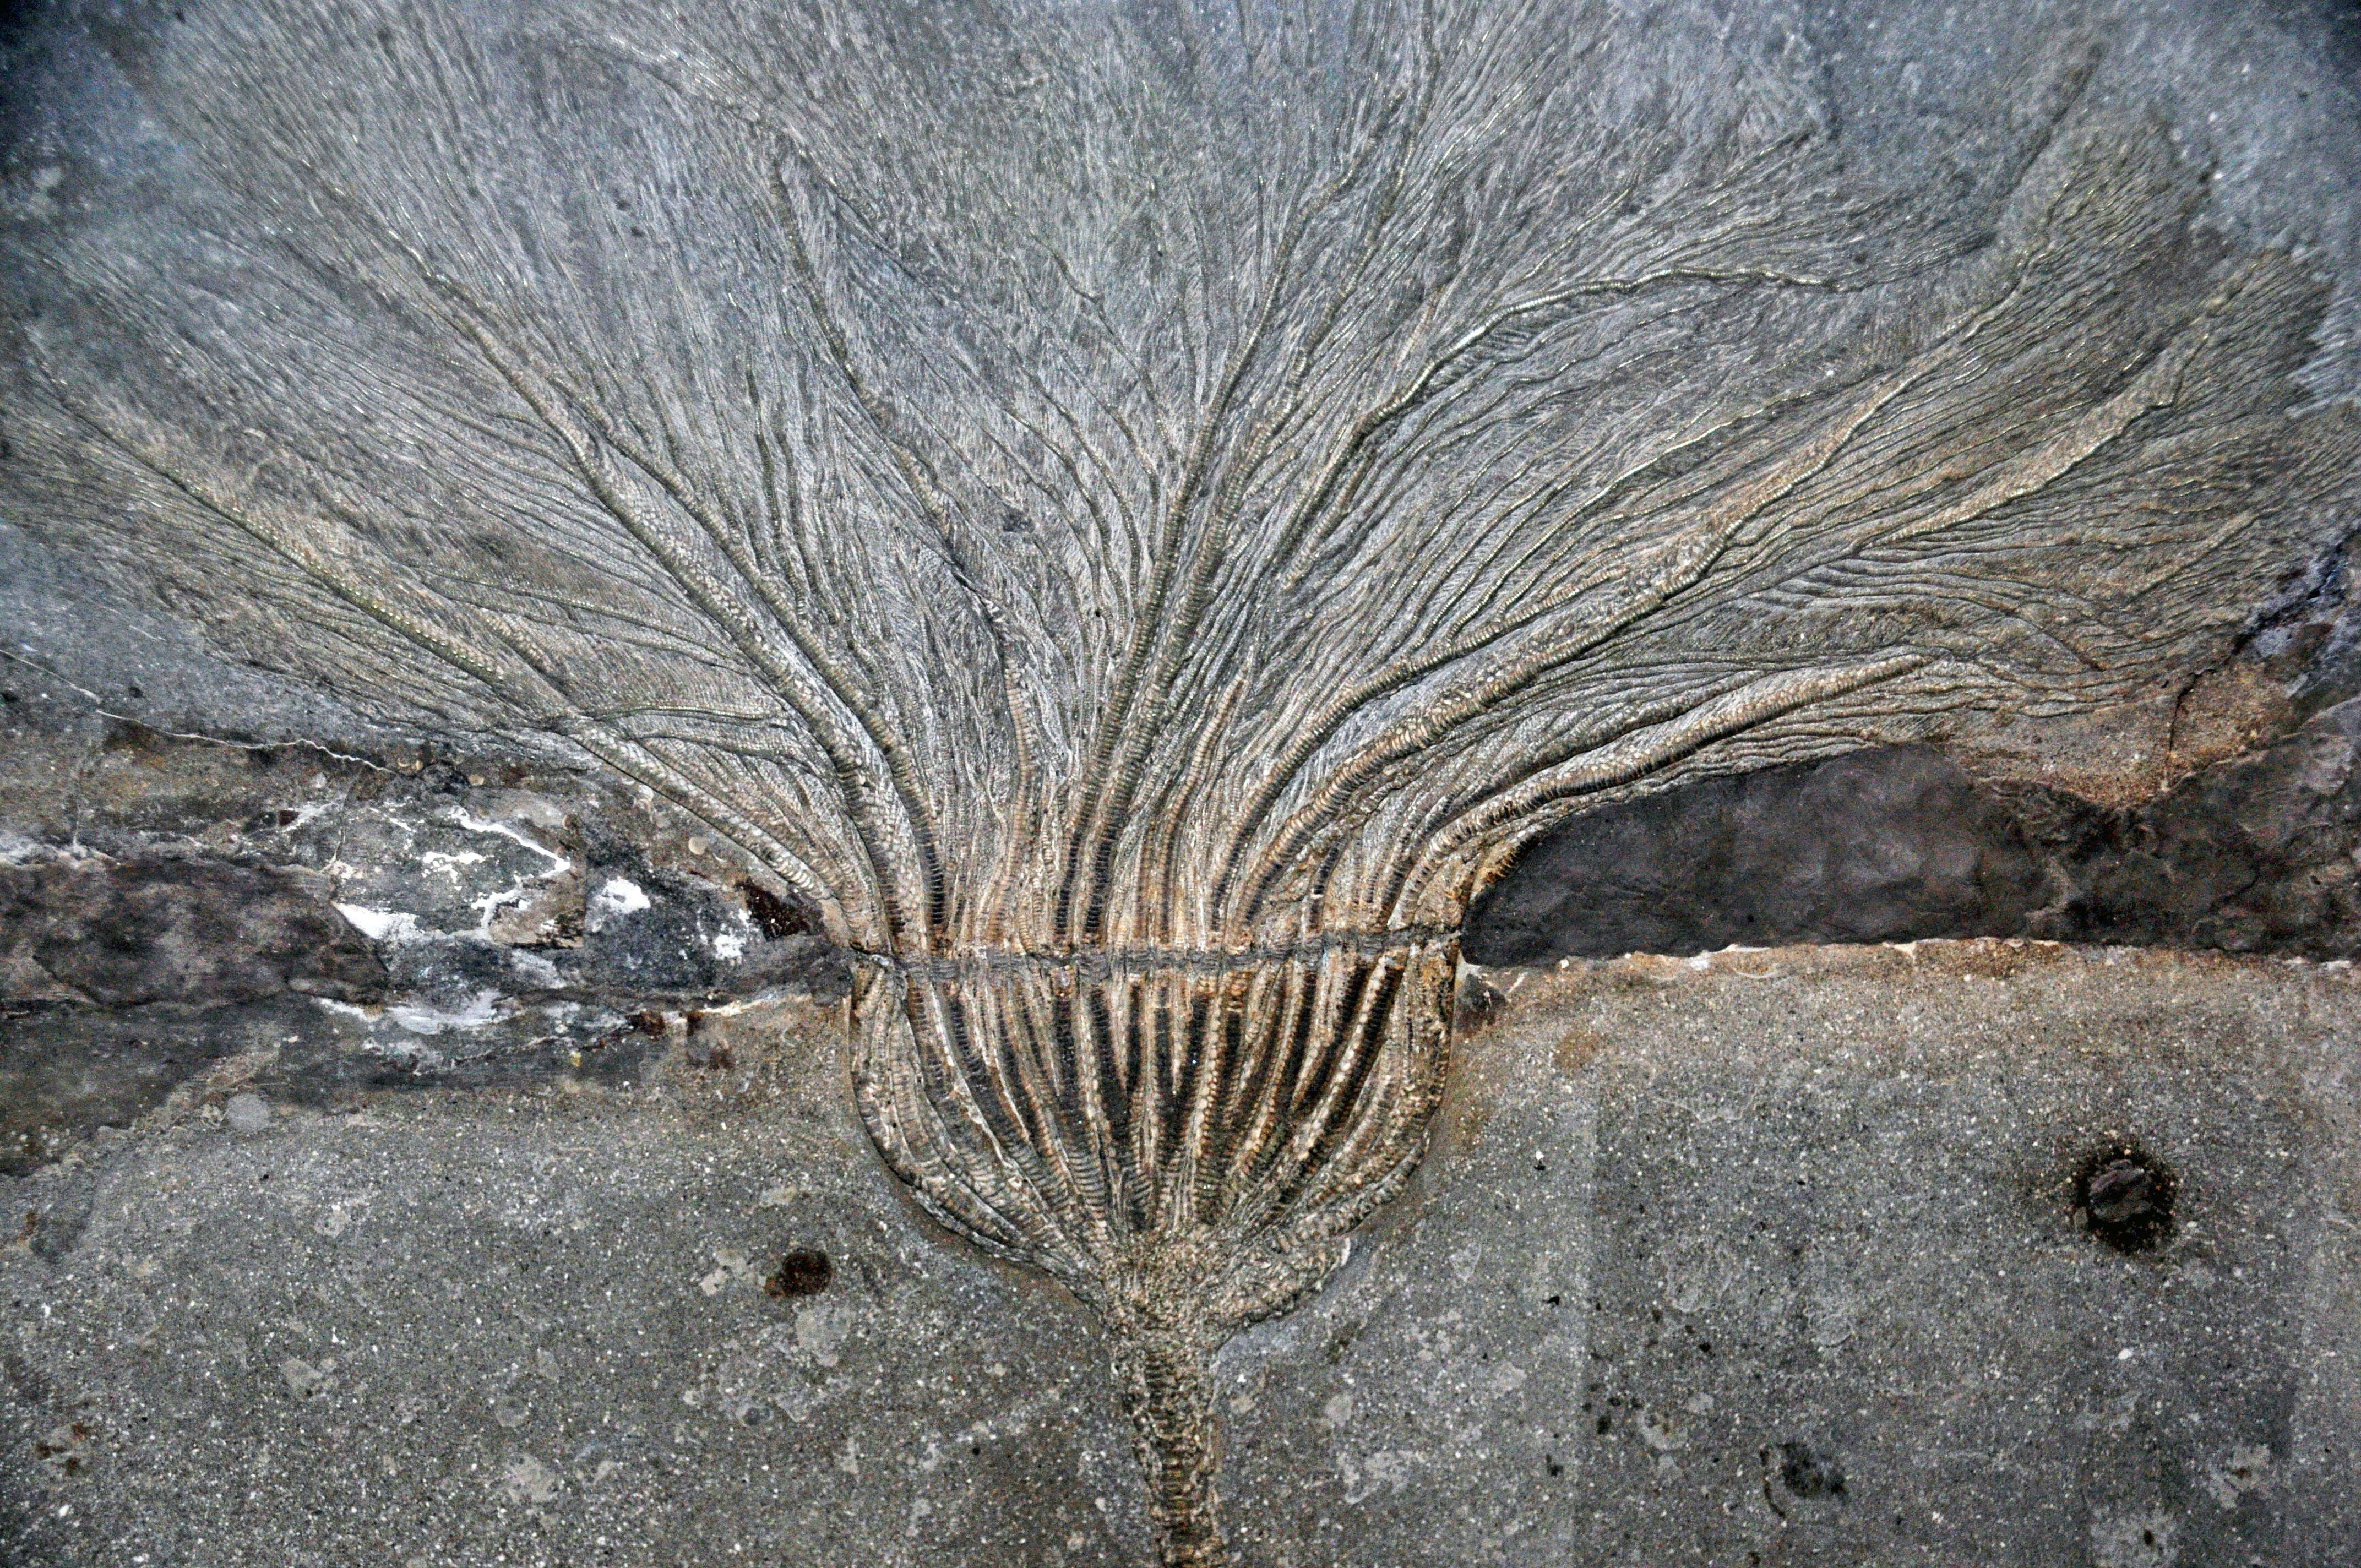 Image of crinoids and relatives